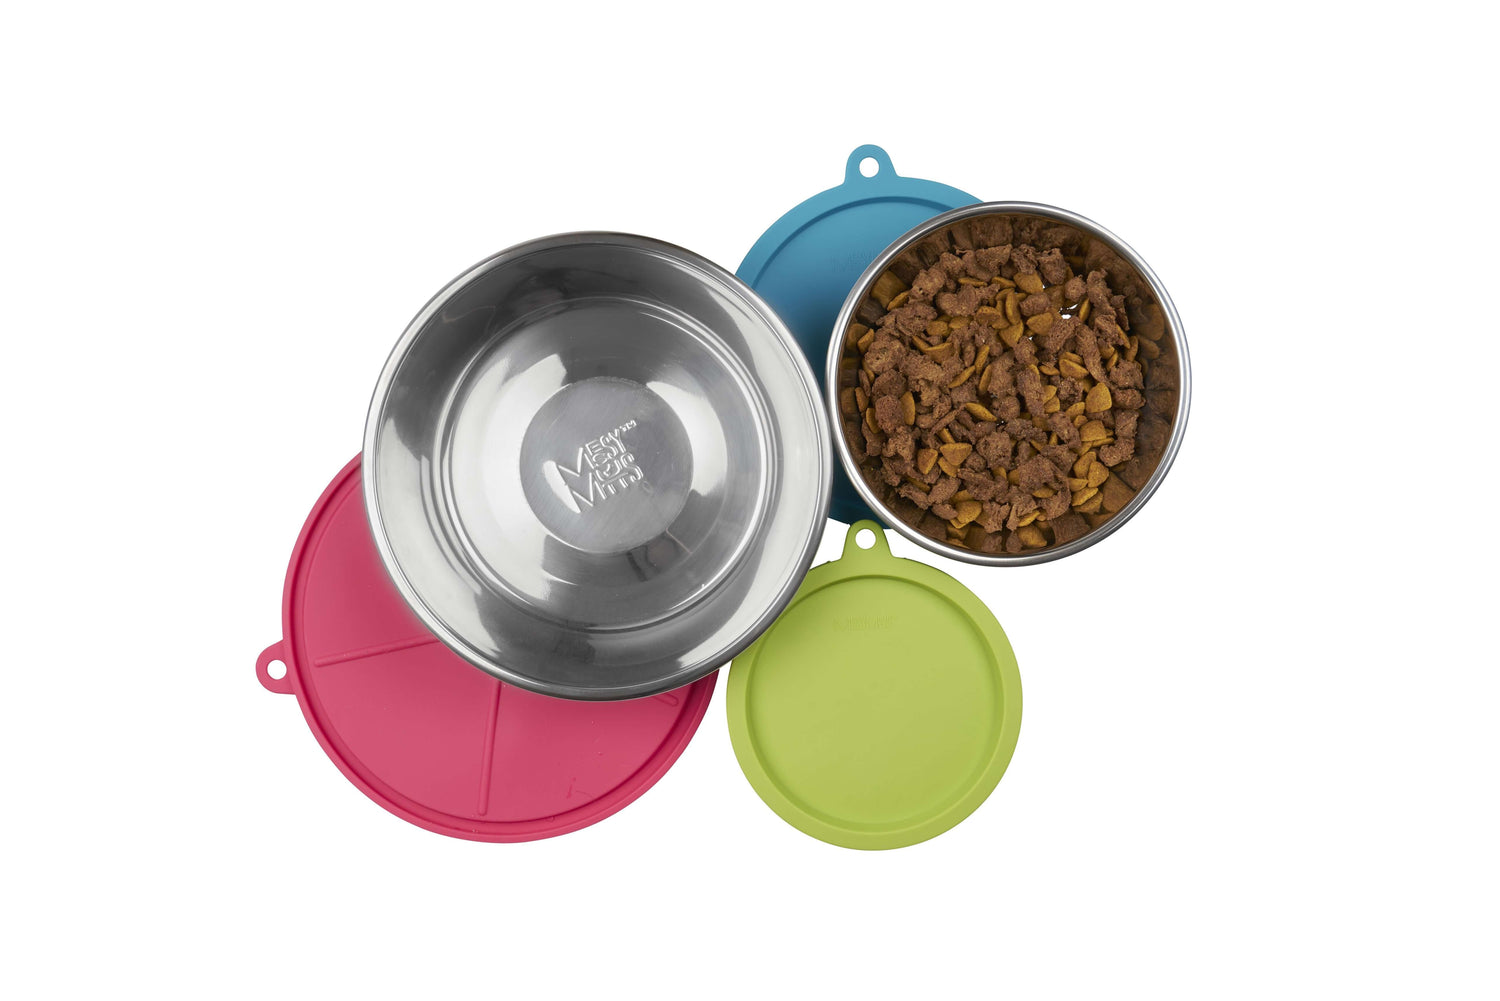 Air tight lids and stainless steel dog bowls for perfect dog food storage. Great travel dog bowls.  